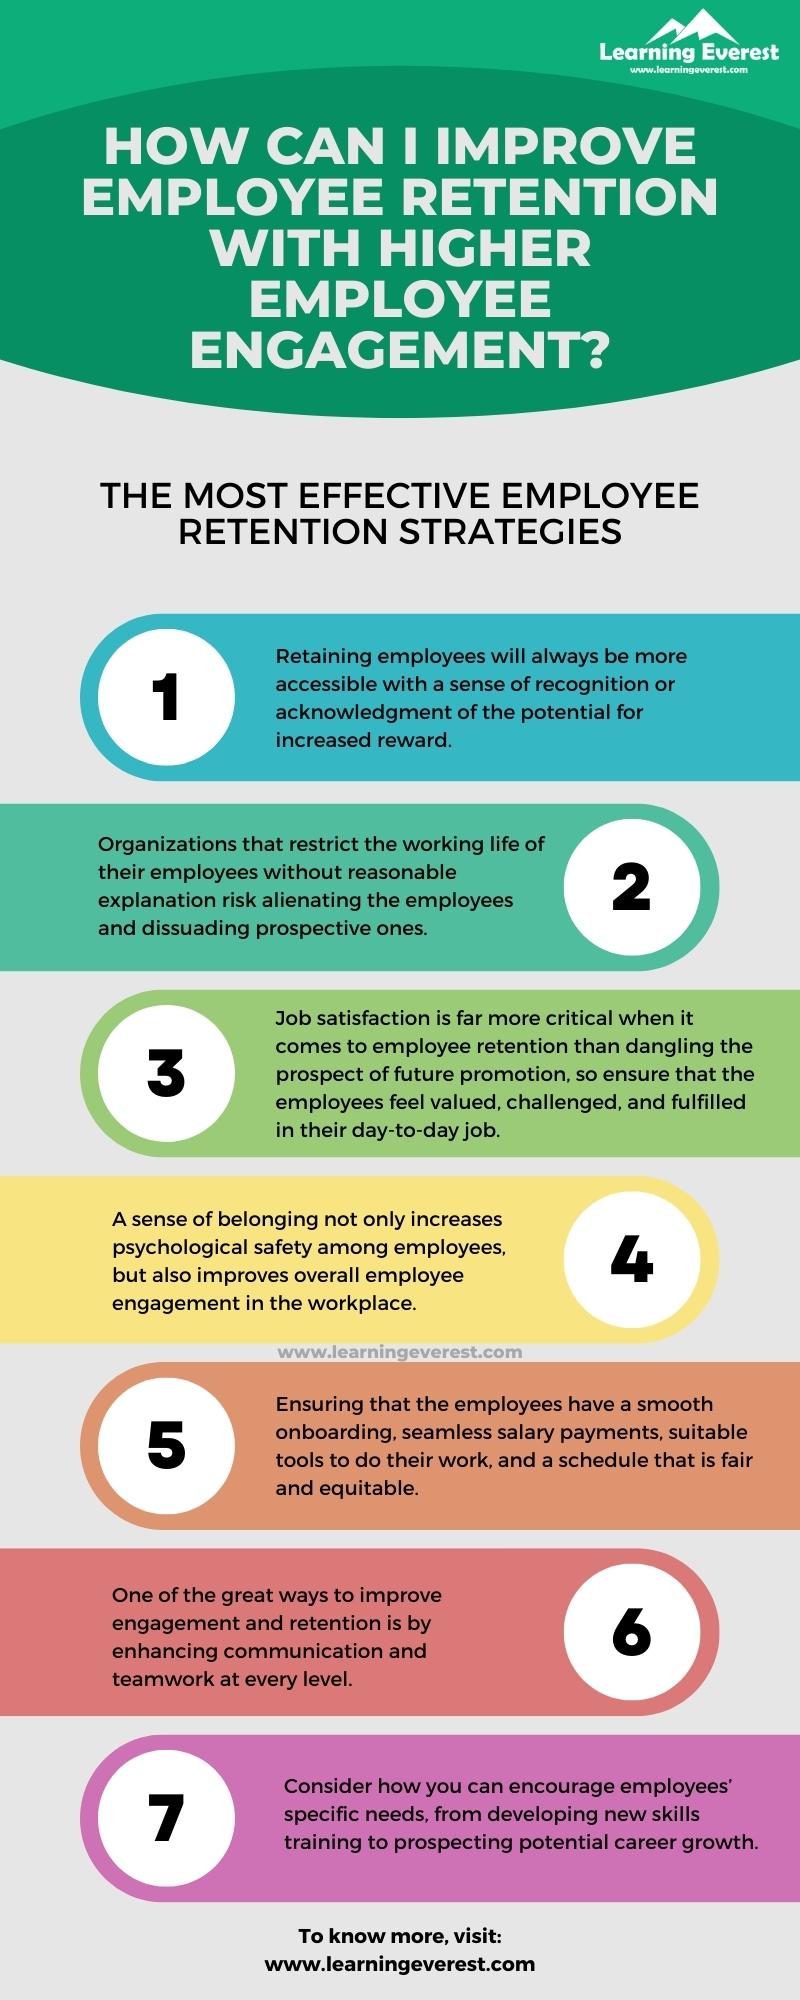 How to Improve Employee Retention with Higher Employee Engagement